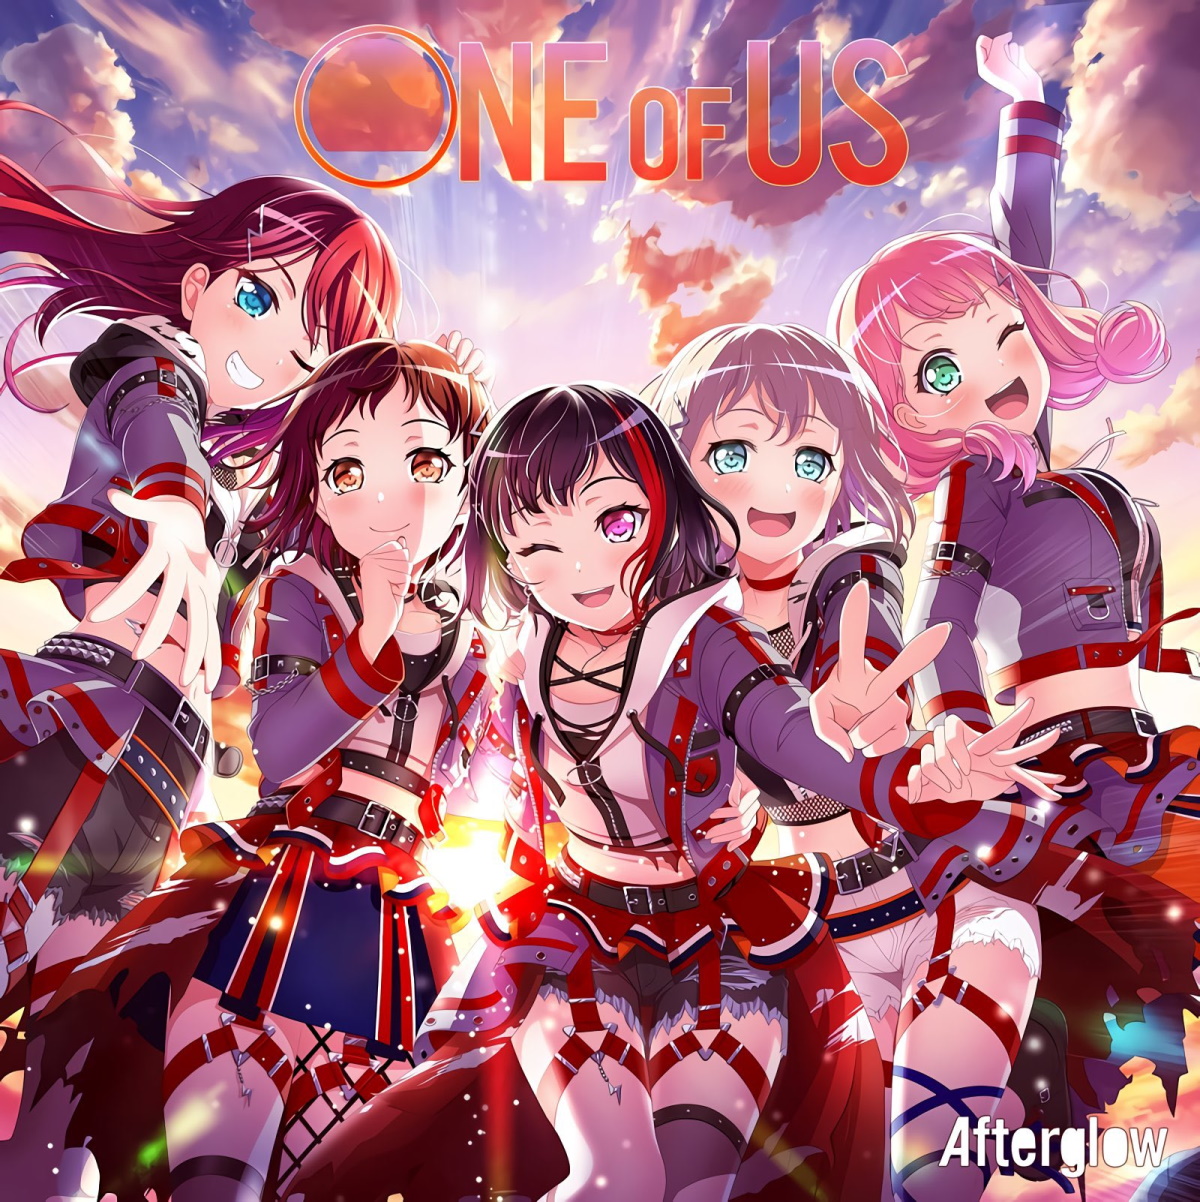 『Afterglow - I knew it! 歌詞』収録の『ONE OF US』ジャケット